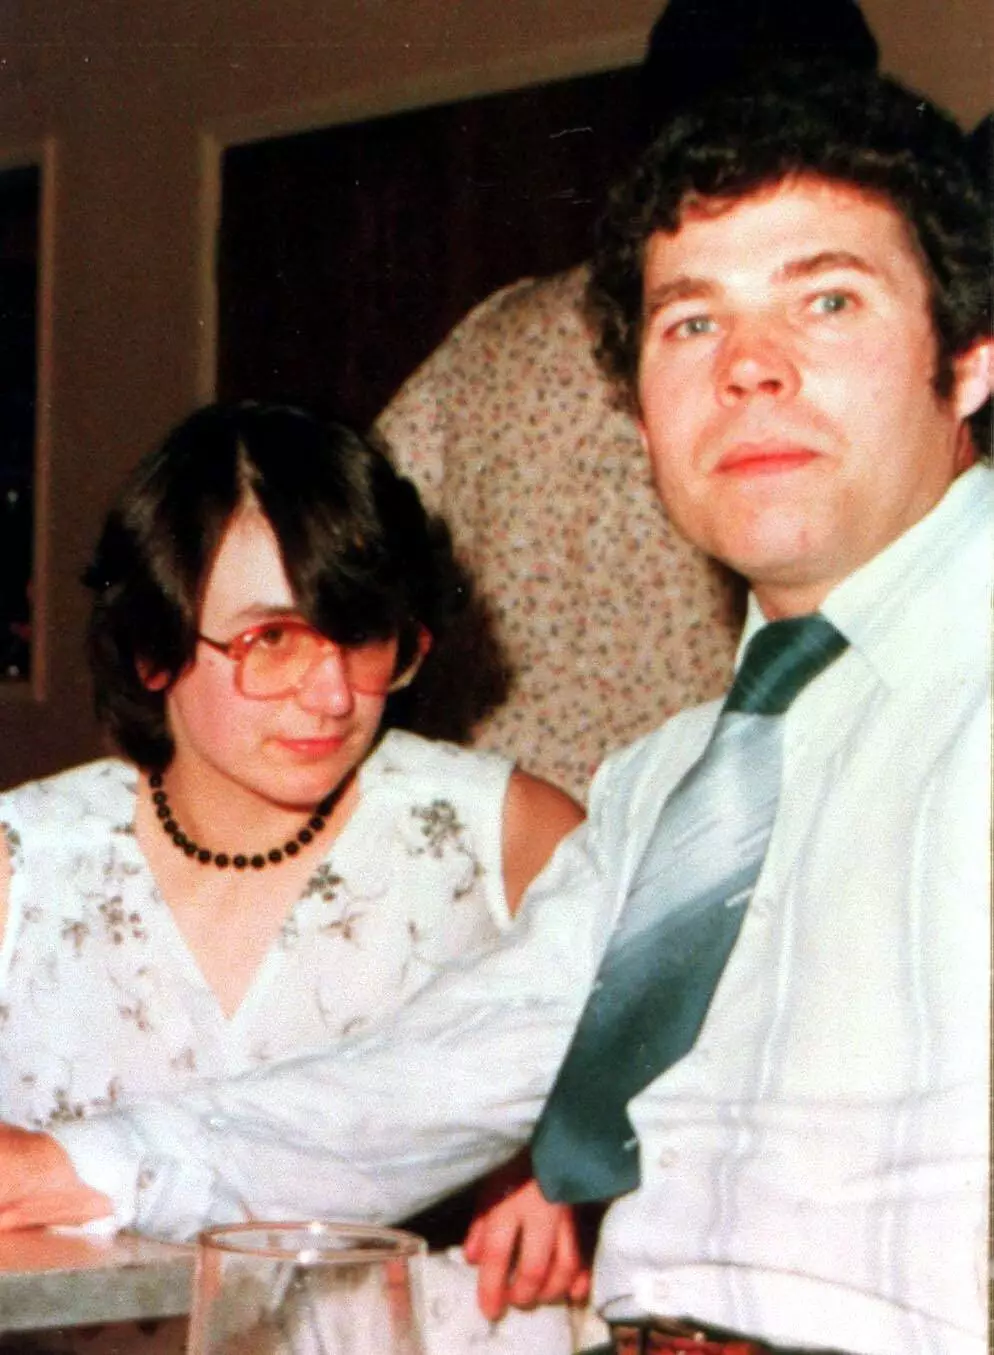 Fred and Rose West are infamous for their crimes